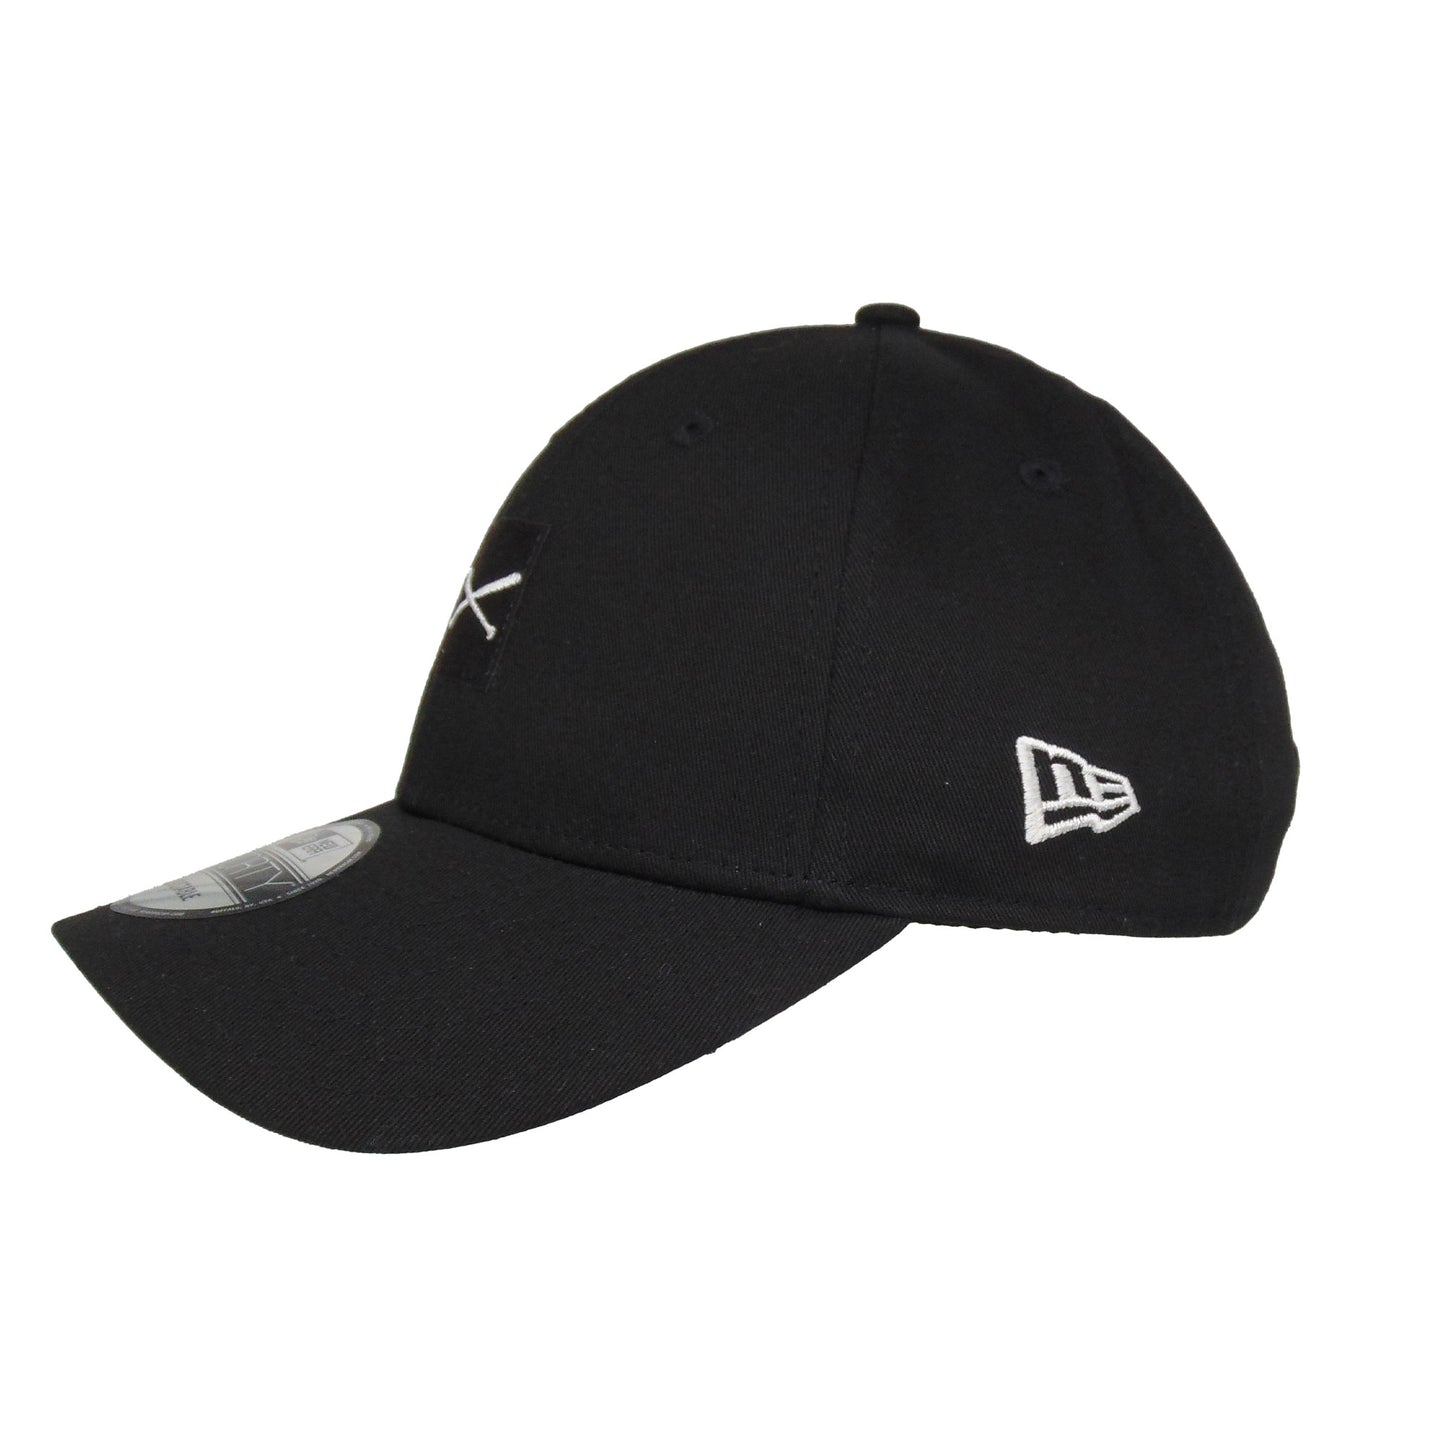 JustFitteds Crossed Bats Patch Logo New Era 9FORTY Cap BLK